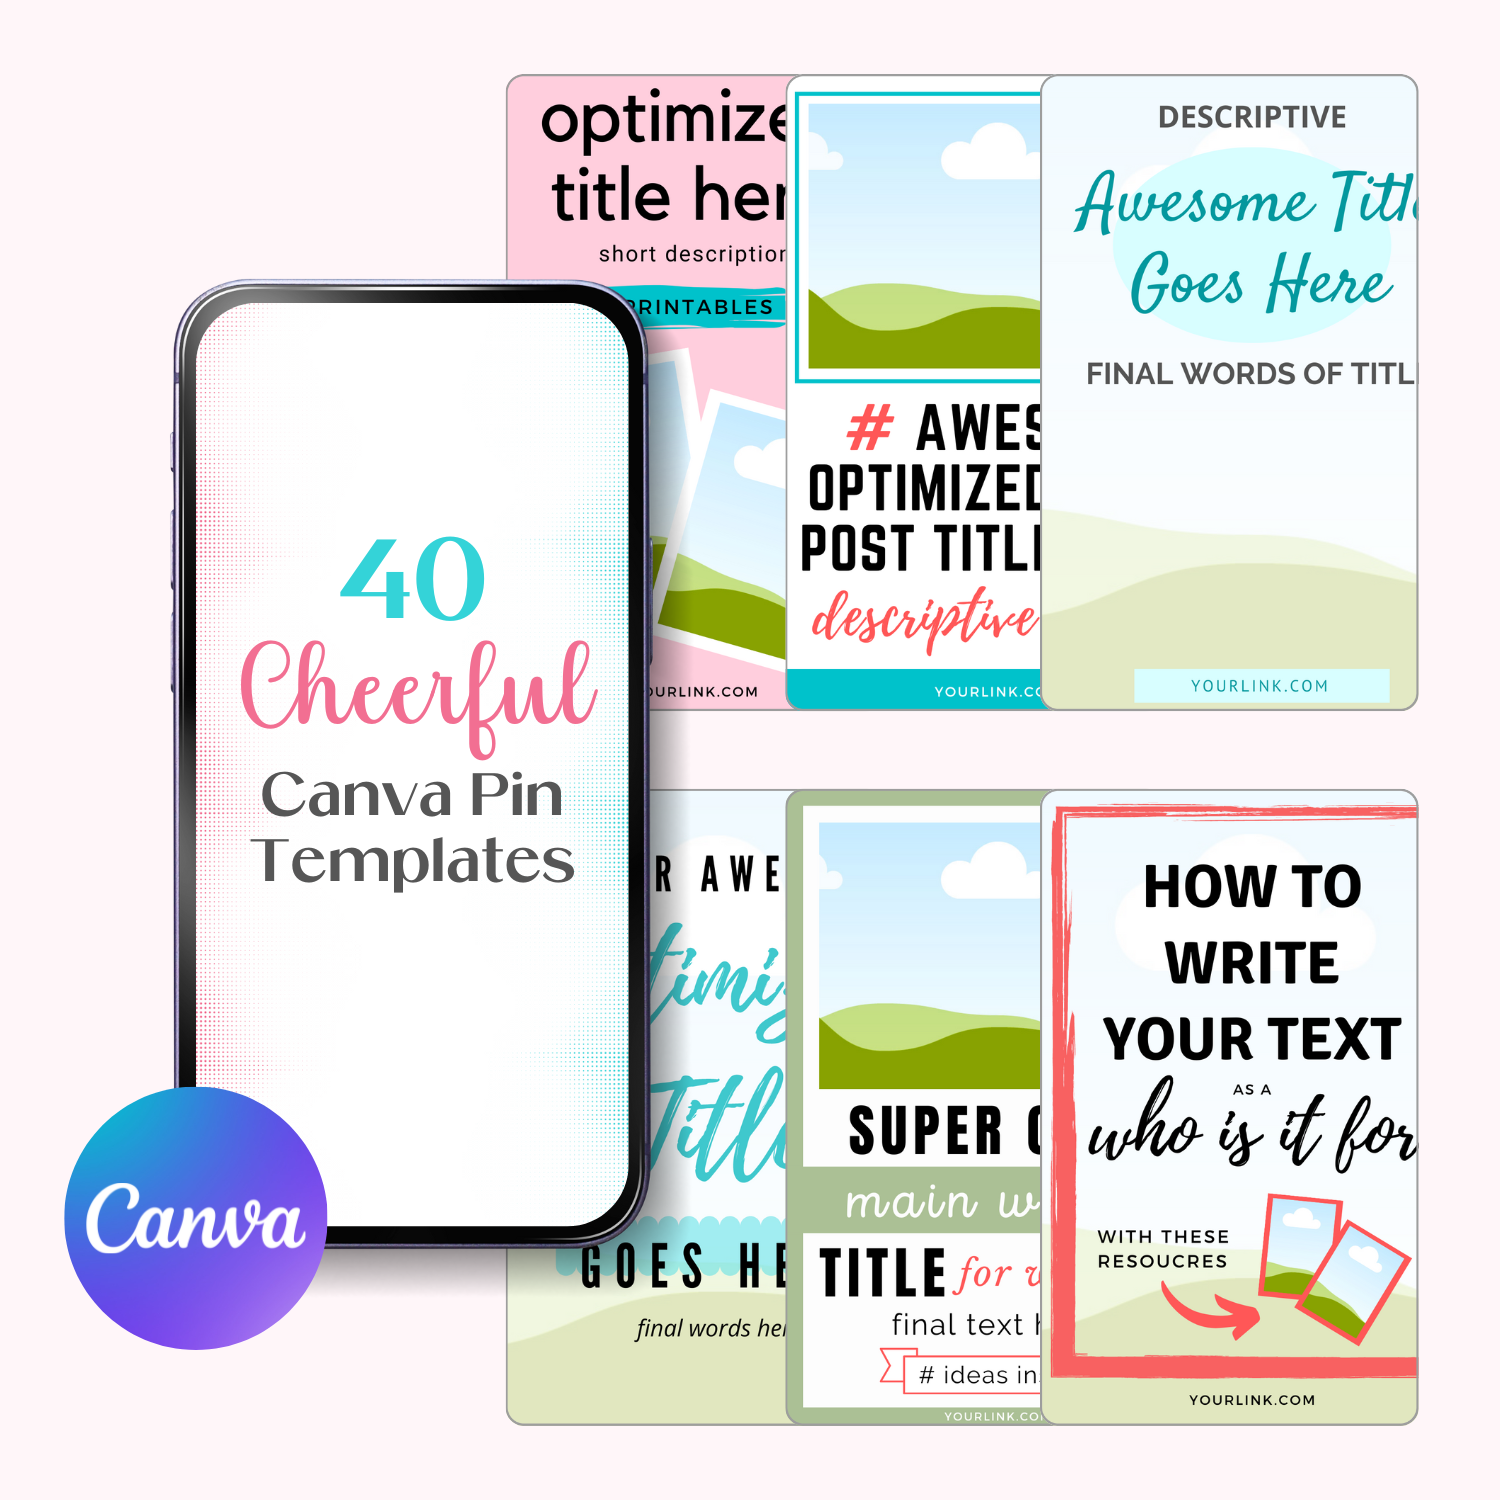 A cell phone and graphic mockup displaying the Canva Pinterest templates.